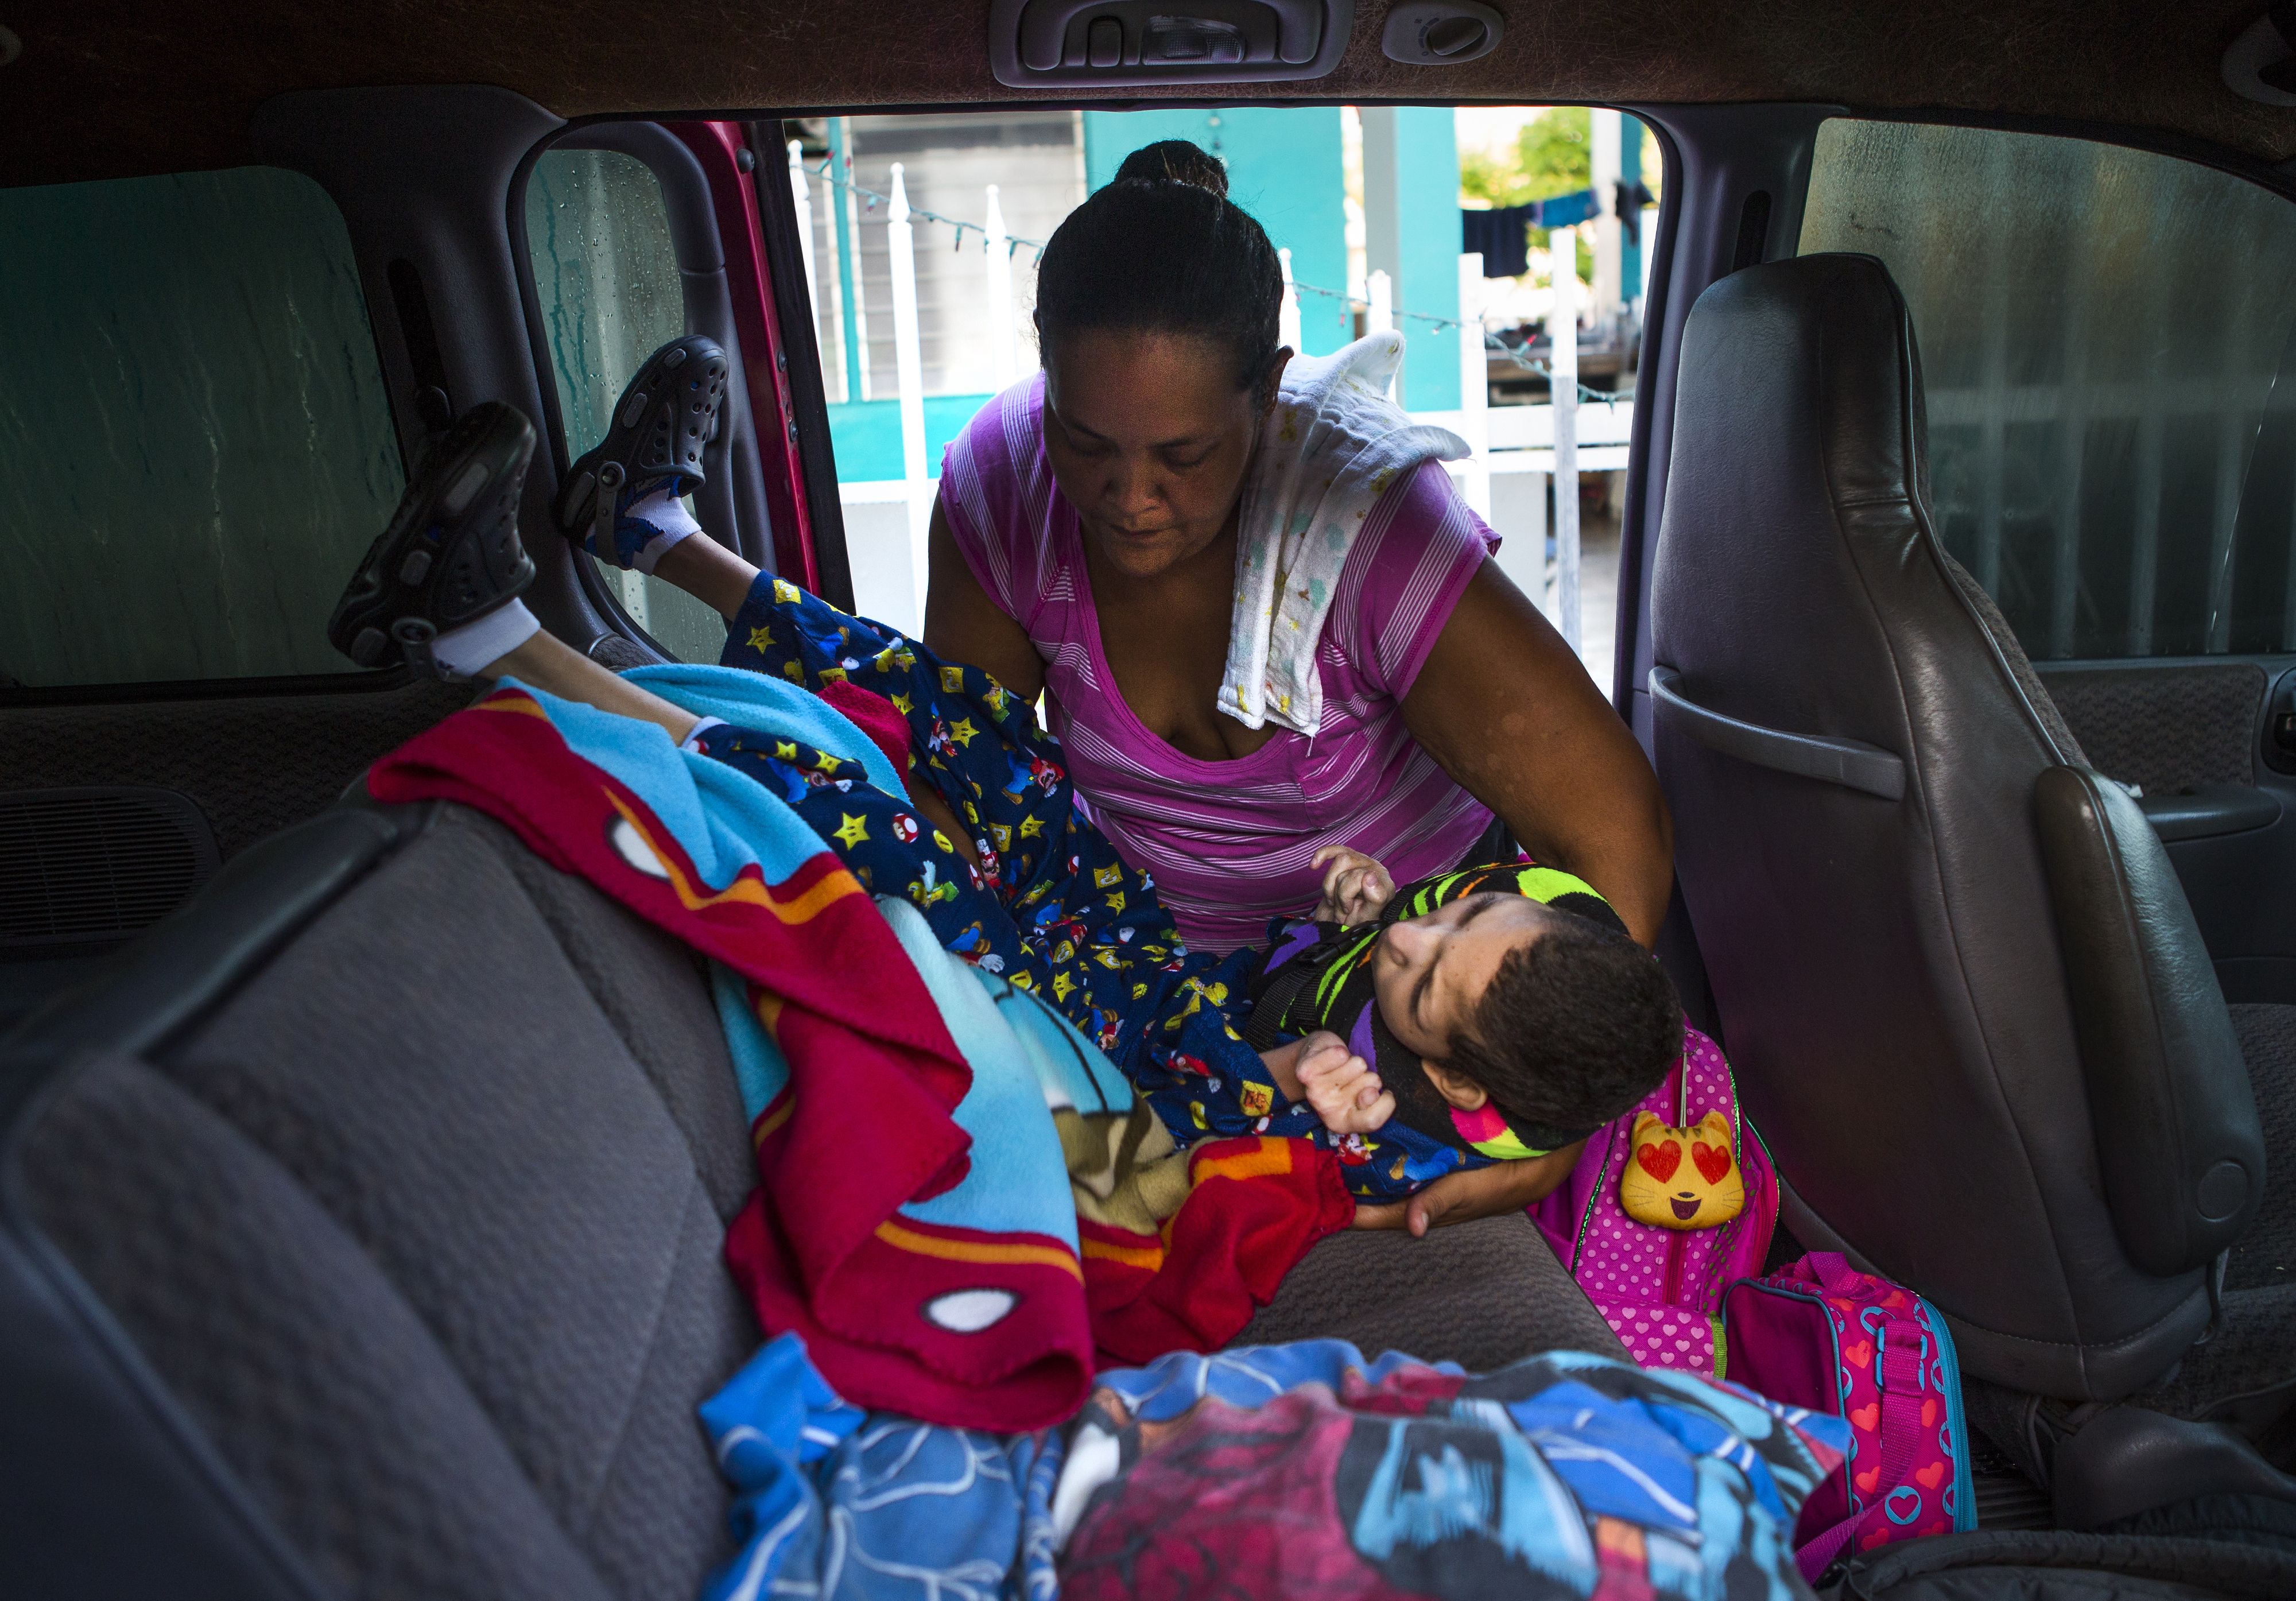 Karen Feliciano loads her son, Kenny, into the middle bench seat of her red Dodge Caravan to take him to school. Instead of driving him around the corner to a school built to accommodate his needs, she takes him to a building that is structurally prepared to withstand the strength of a Category 4 hurricane, but does not properly facilitate special education students like Kenny. Image by Ryan Michalesko. Puerto Rico, 2017.